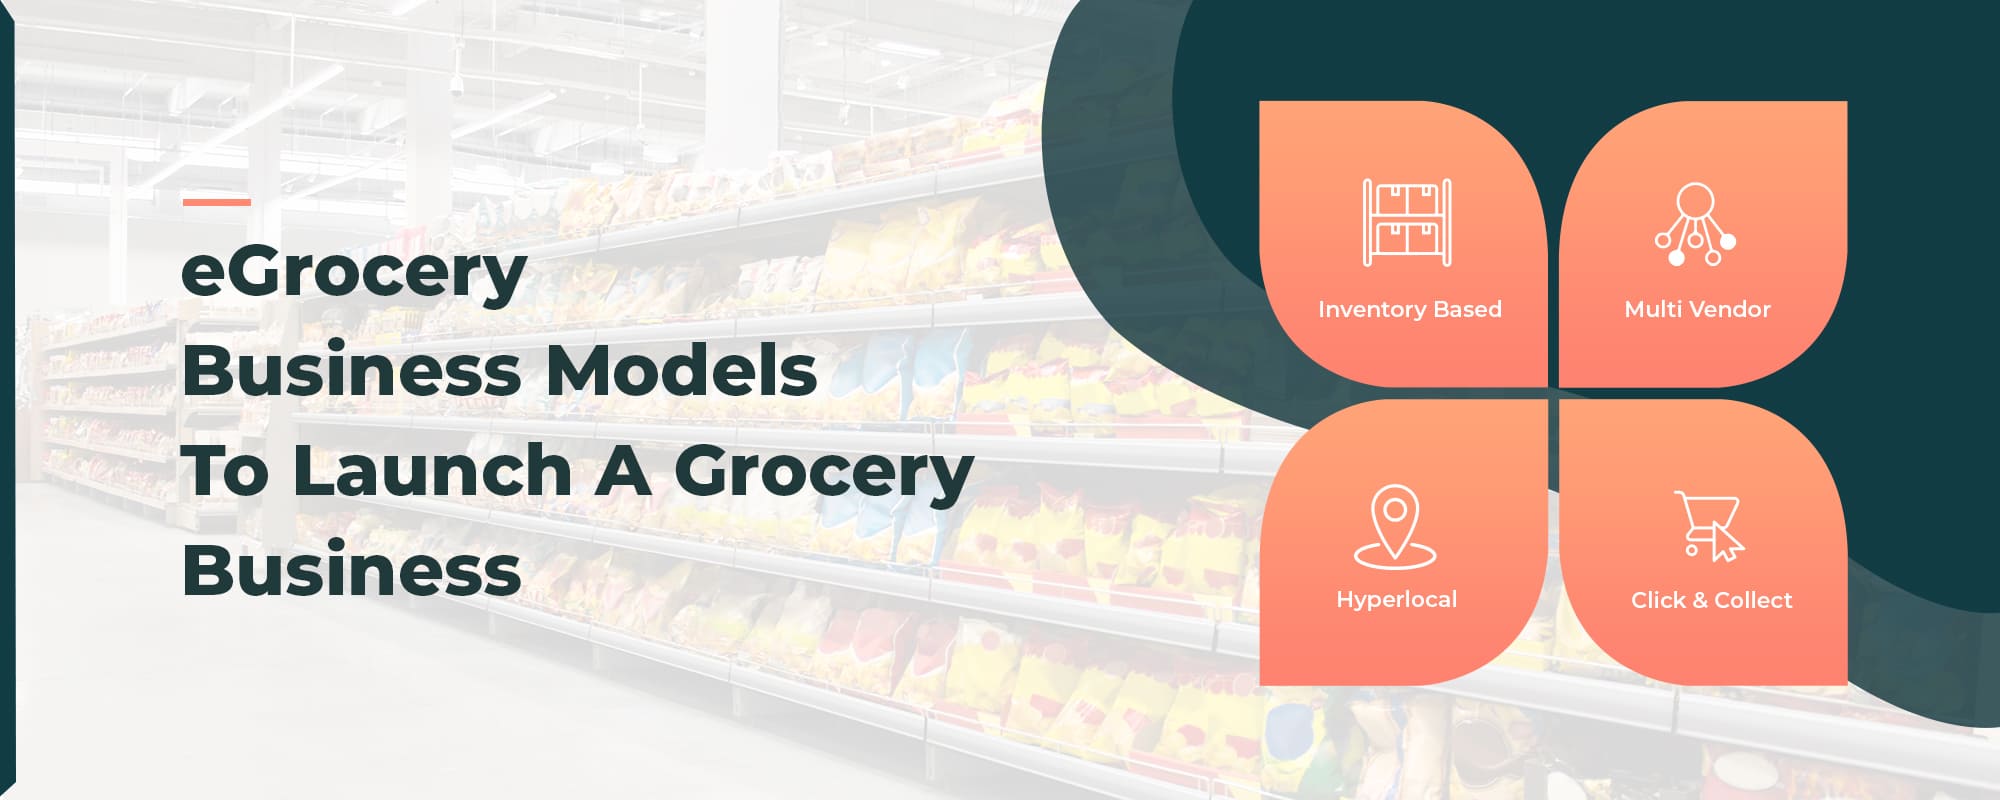 Different Business Models To Launch An Online Grocery Business